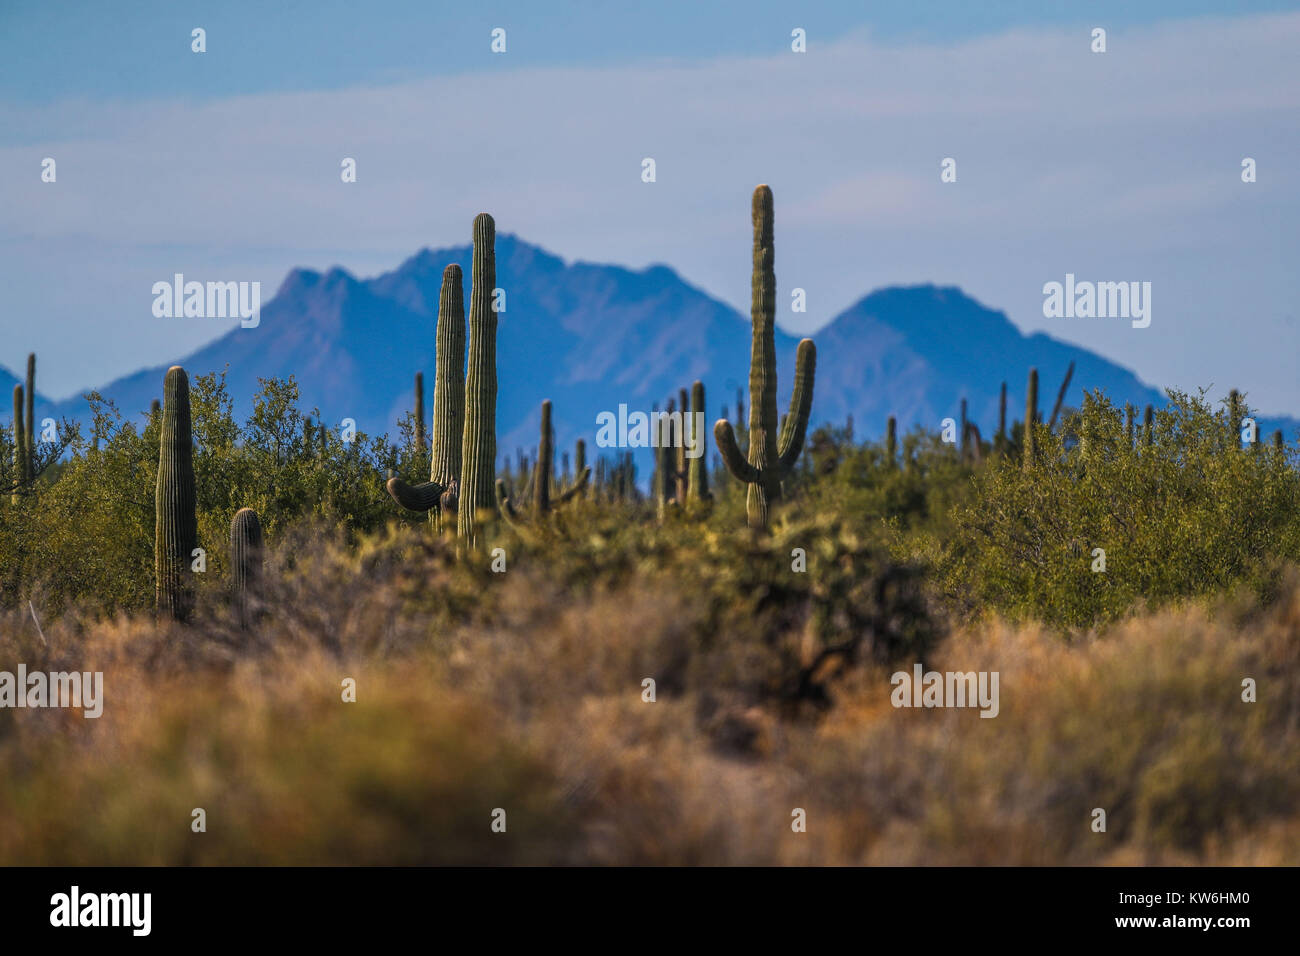 Road, towers and electric light poles crossing the landscape and mountains of the Sonoran desert. Sahuaros, Cactus species, thorn scrub. Punta Chueca Stock Photo